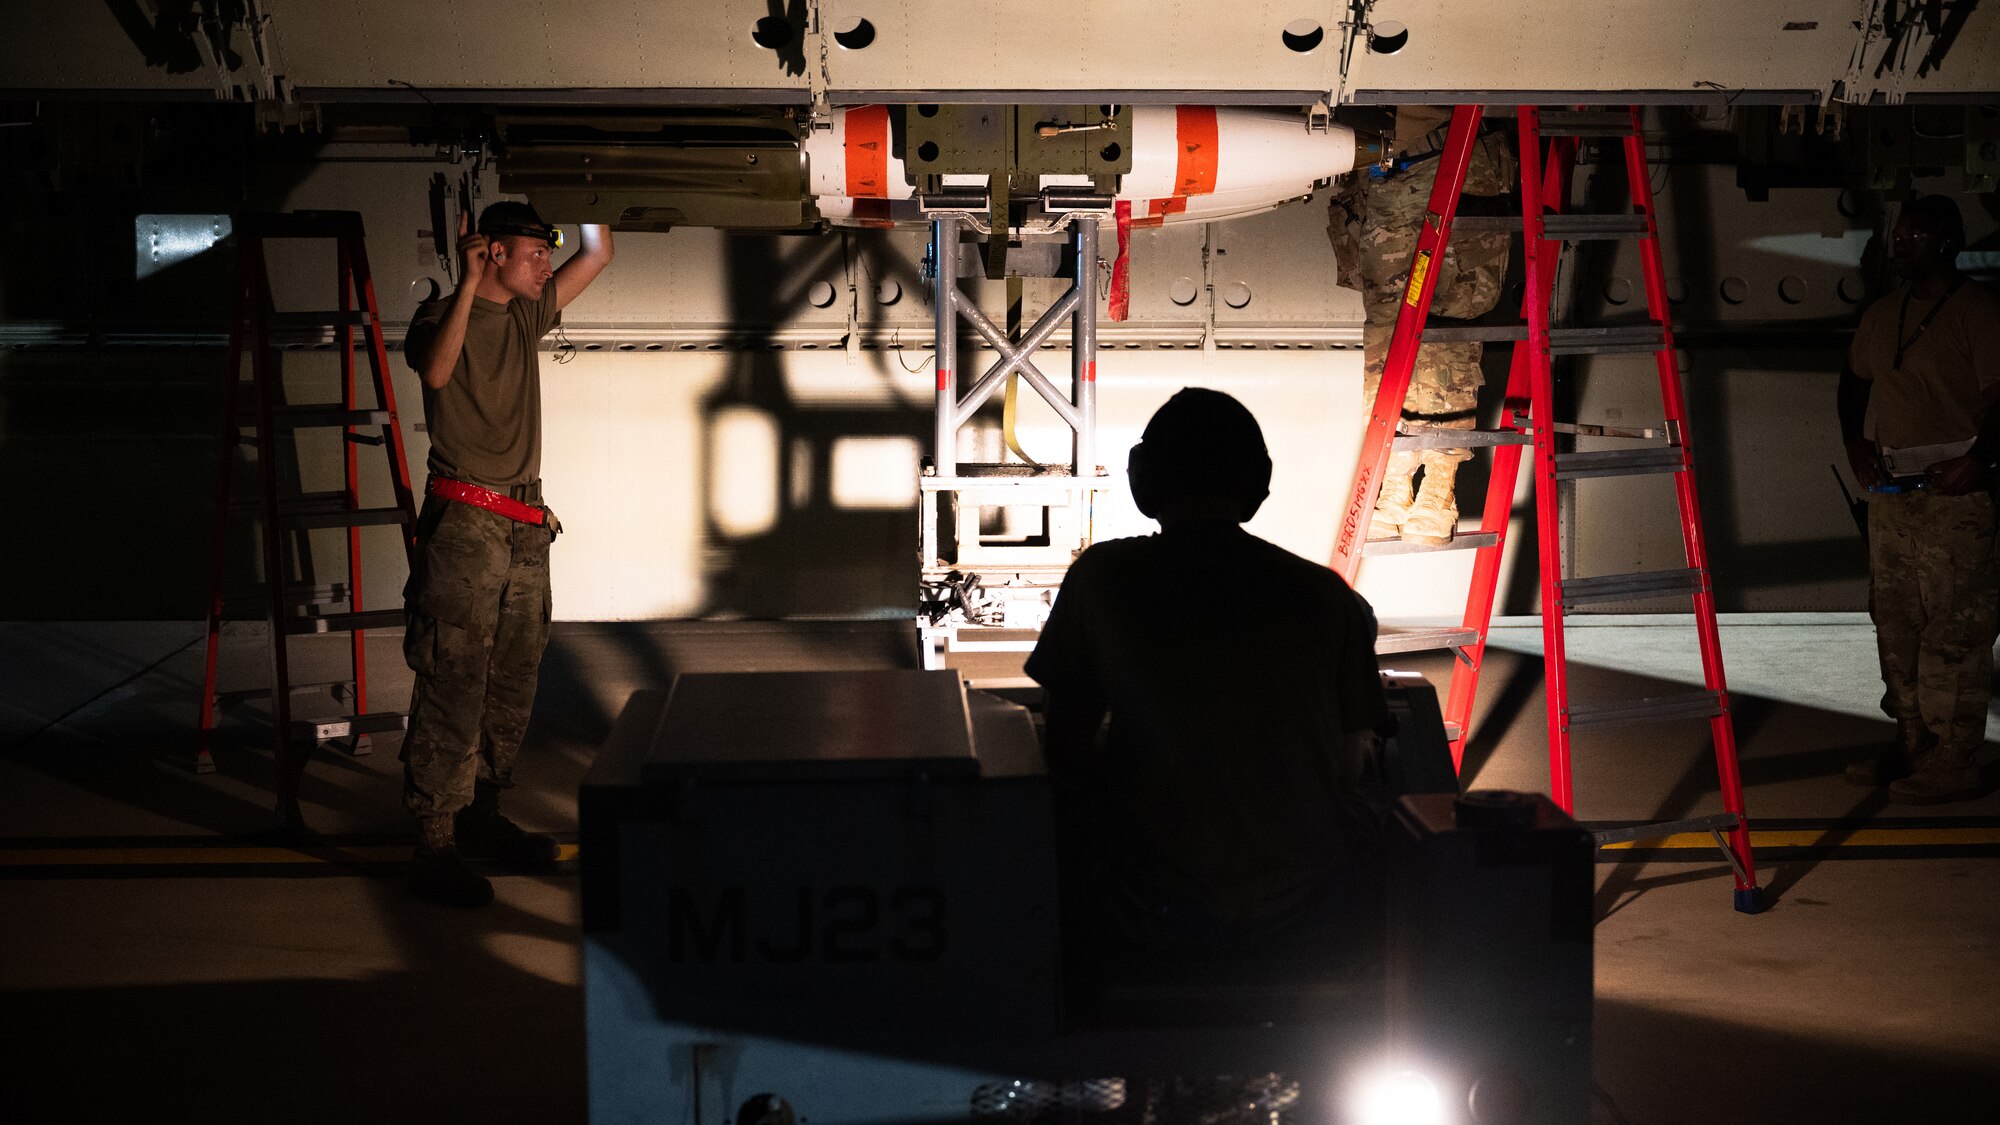 A weapons load crew team from the 2nd Aircraft Maintenance Squadron load a MK-62 Quickstrike naval mine onto a B-52H Stratofortress in support of a Bomber Task Force deployment at Barksdale Air Force Base, Louisiana, Aug. 25, 2021. The B-52 has the ability to carry and employ naval mines, as well as conventional and nuclear weapons. (U.S. Air Force photo by Senior Airman Jacob B. Wrightsman)